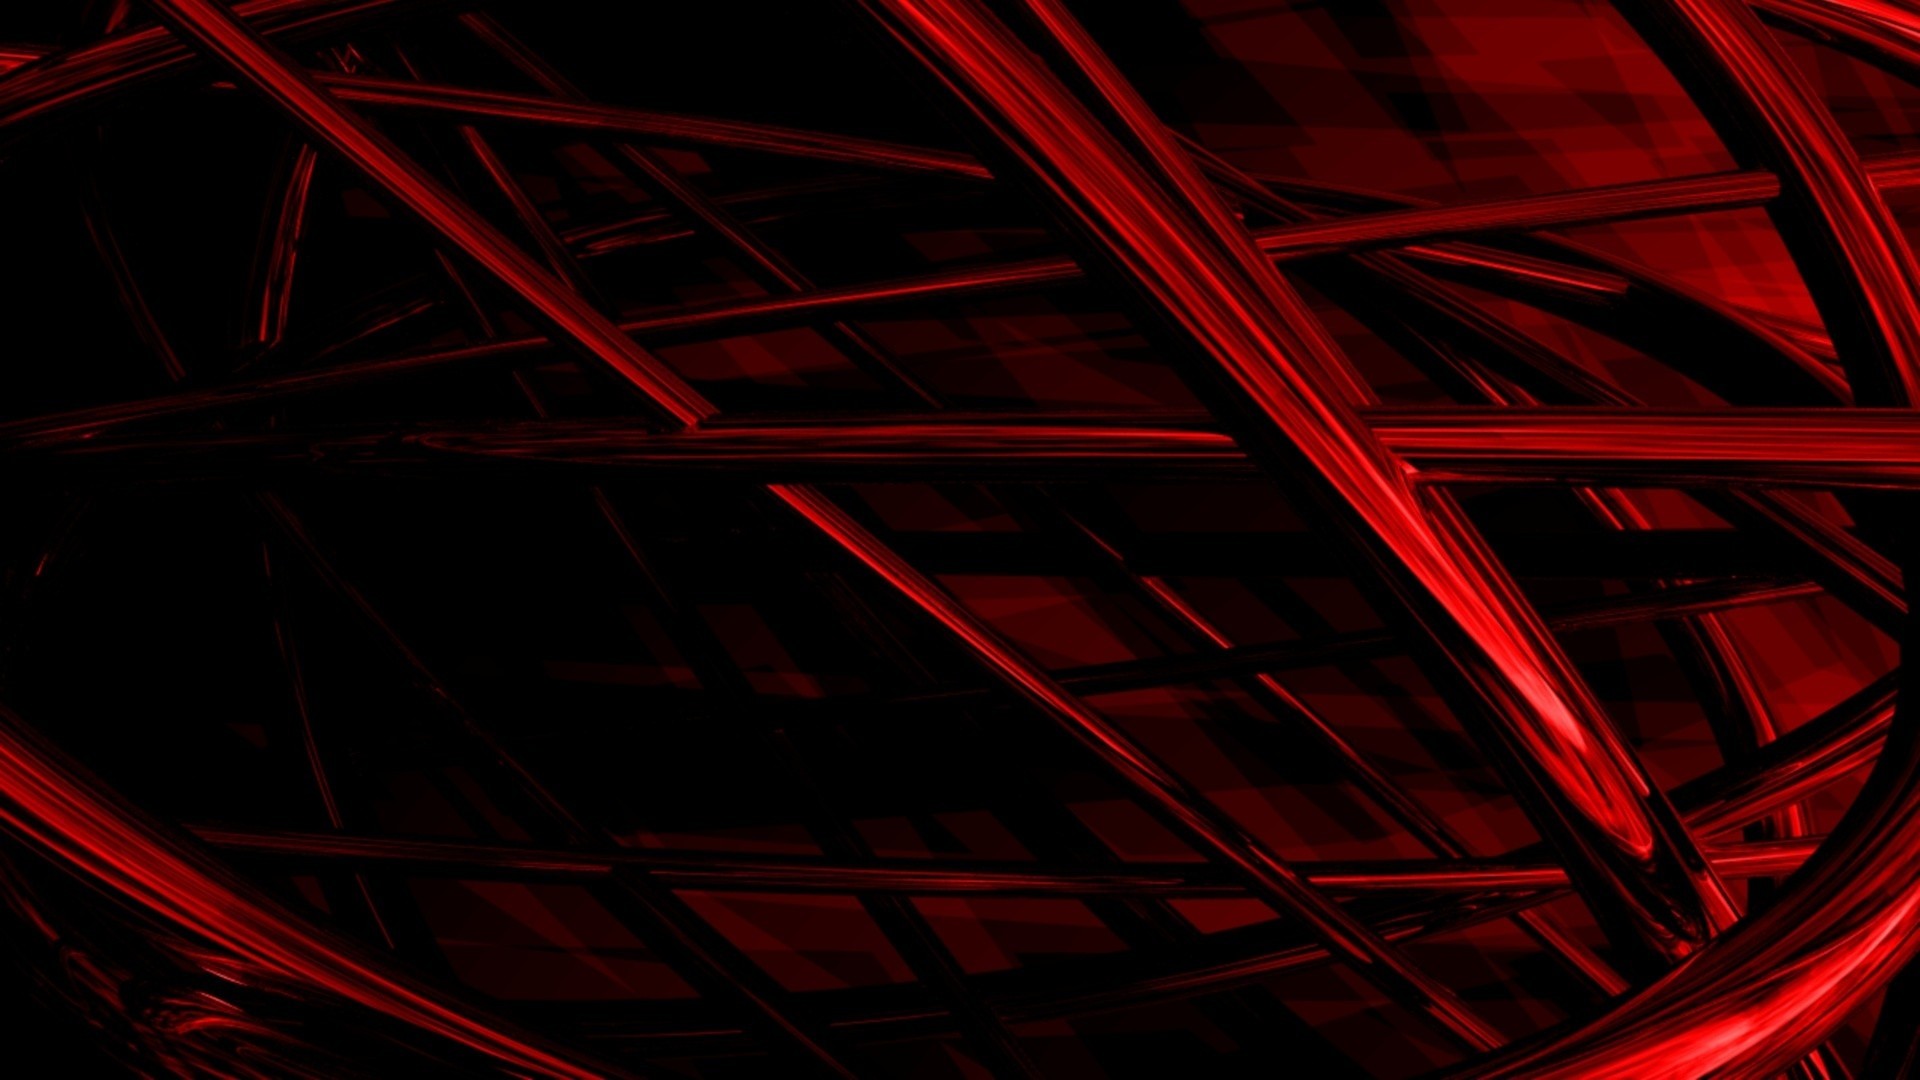 1920x1080 Download now full hd wallpaper duct red dark background ...